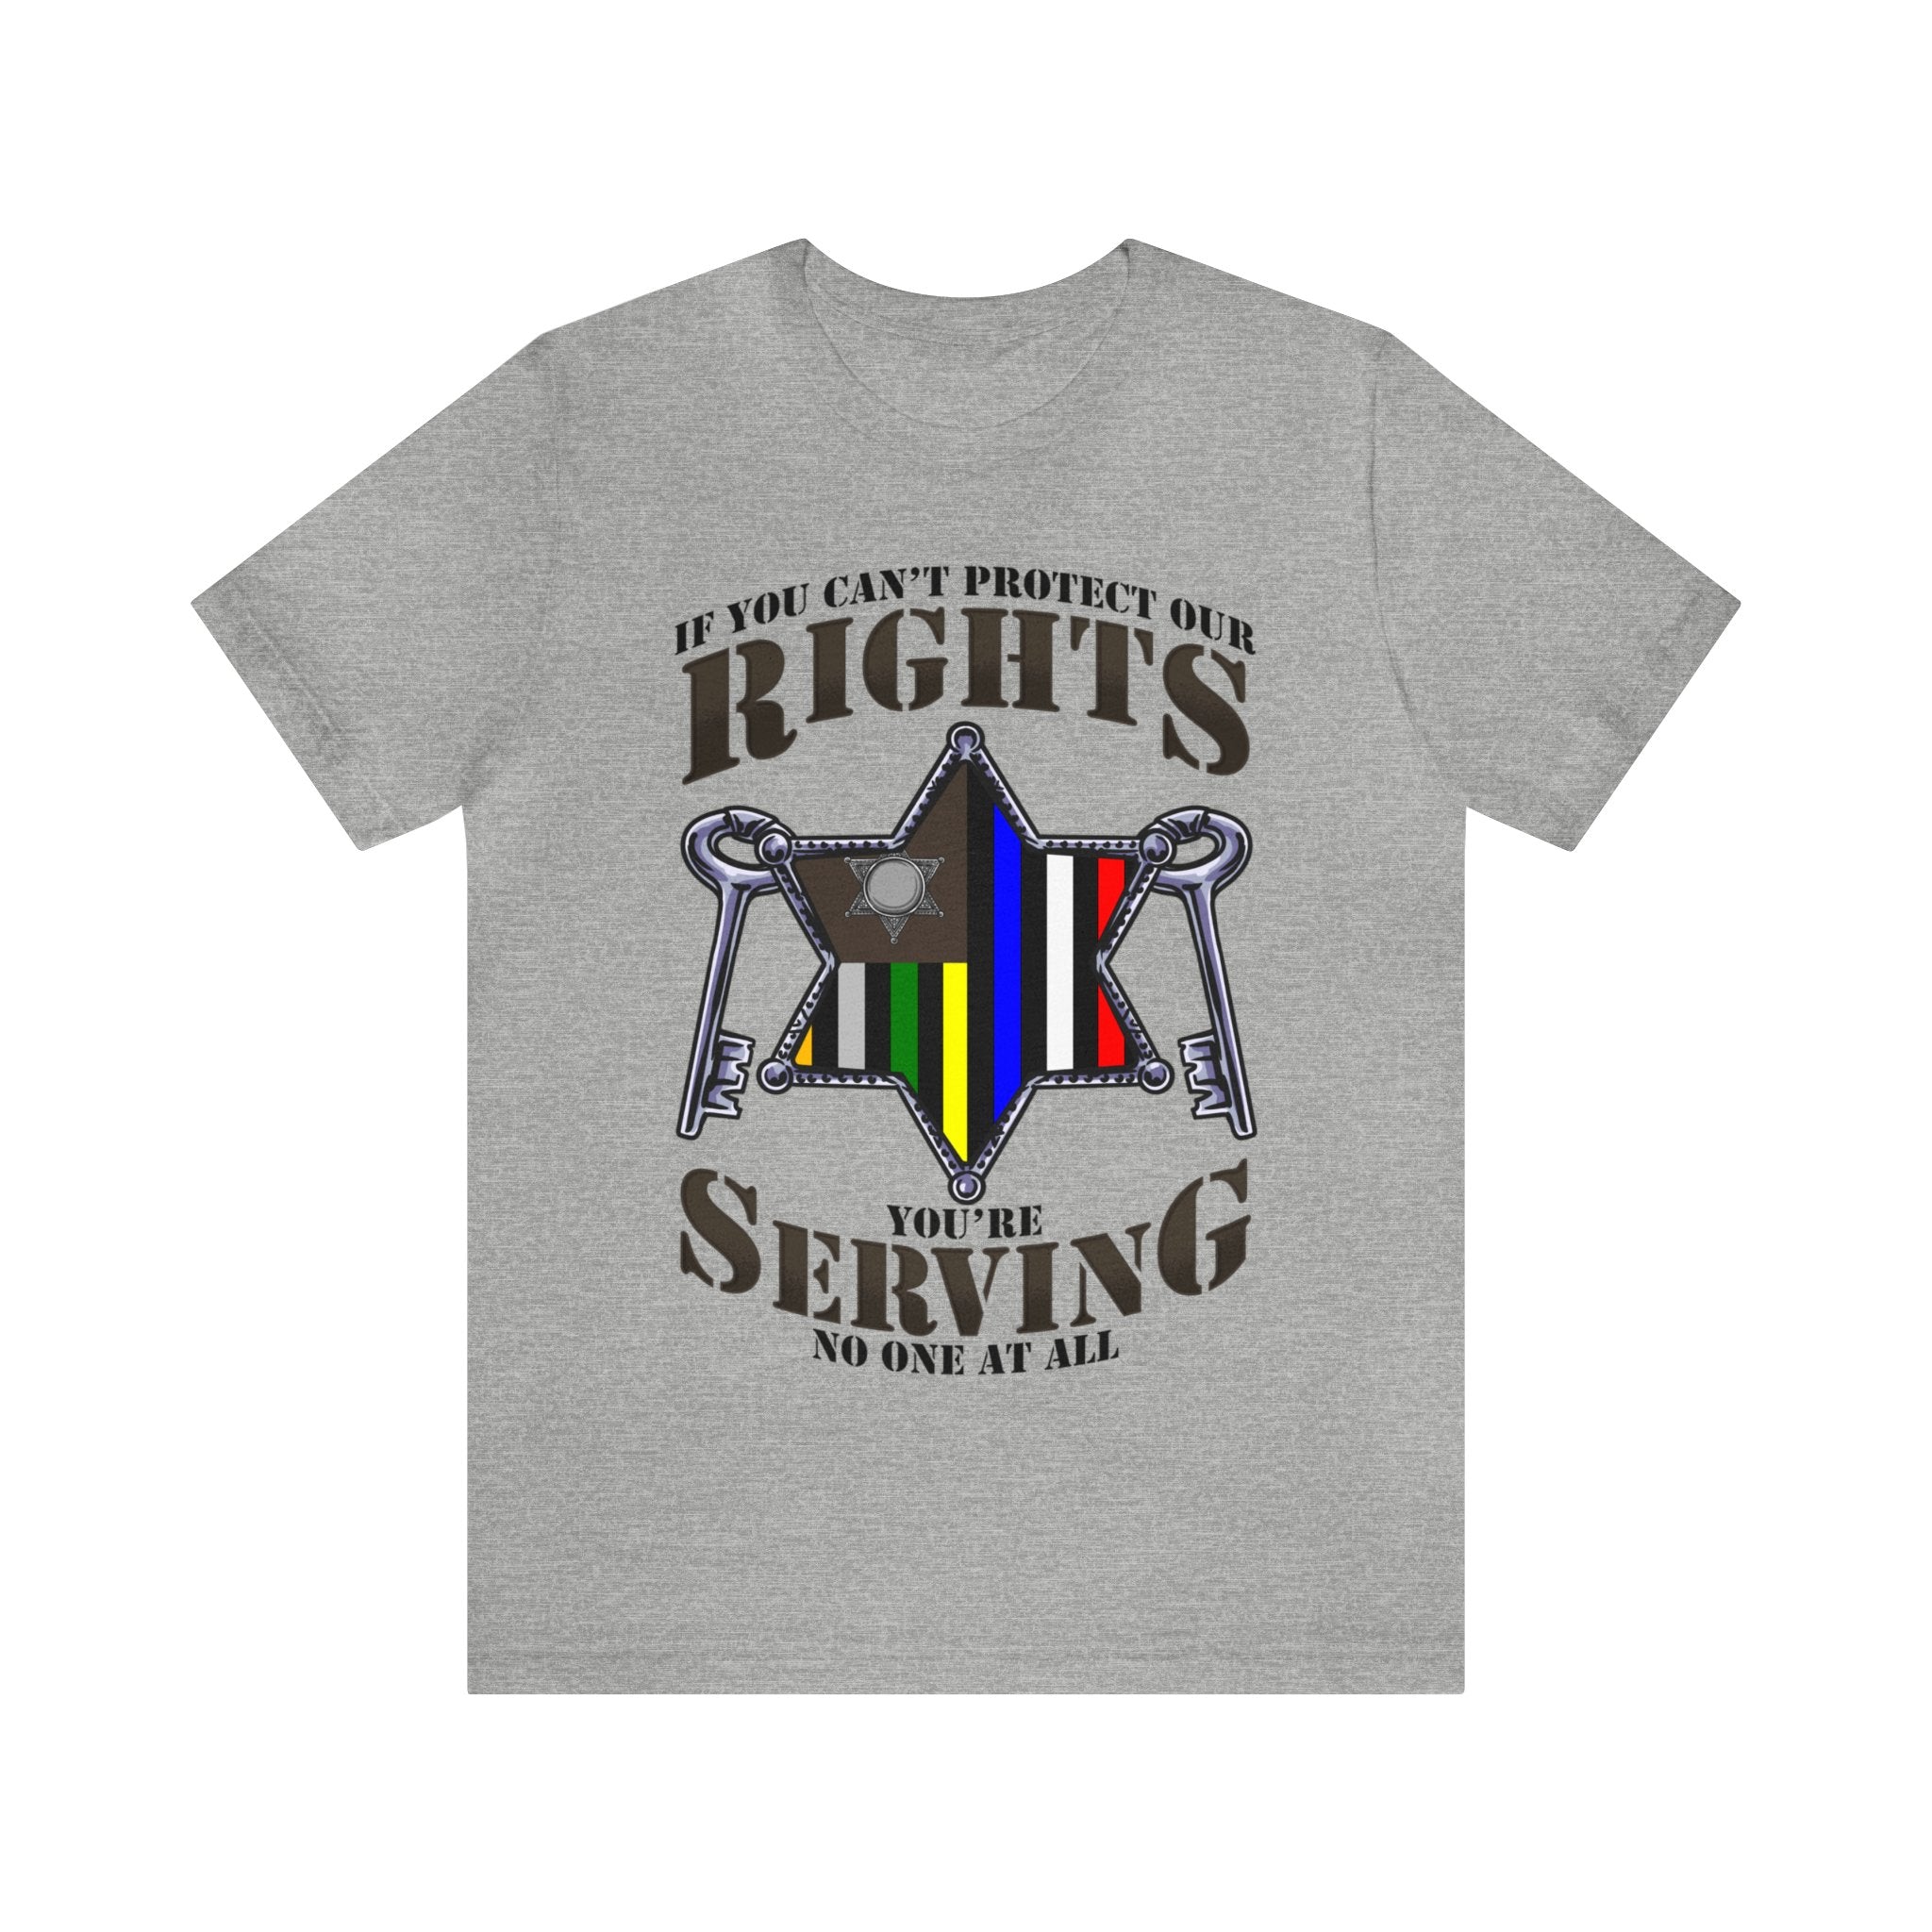 Thin Sheriff & Corrections Line Tee - Rights/Serving